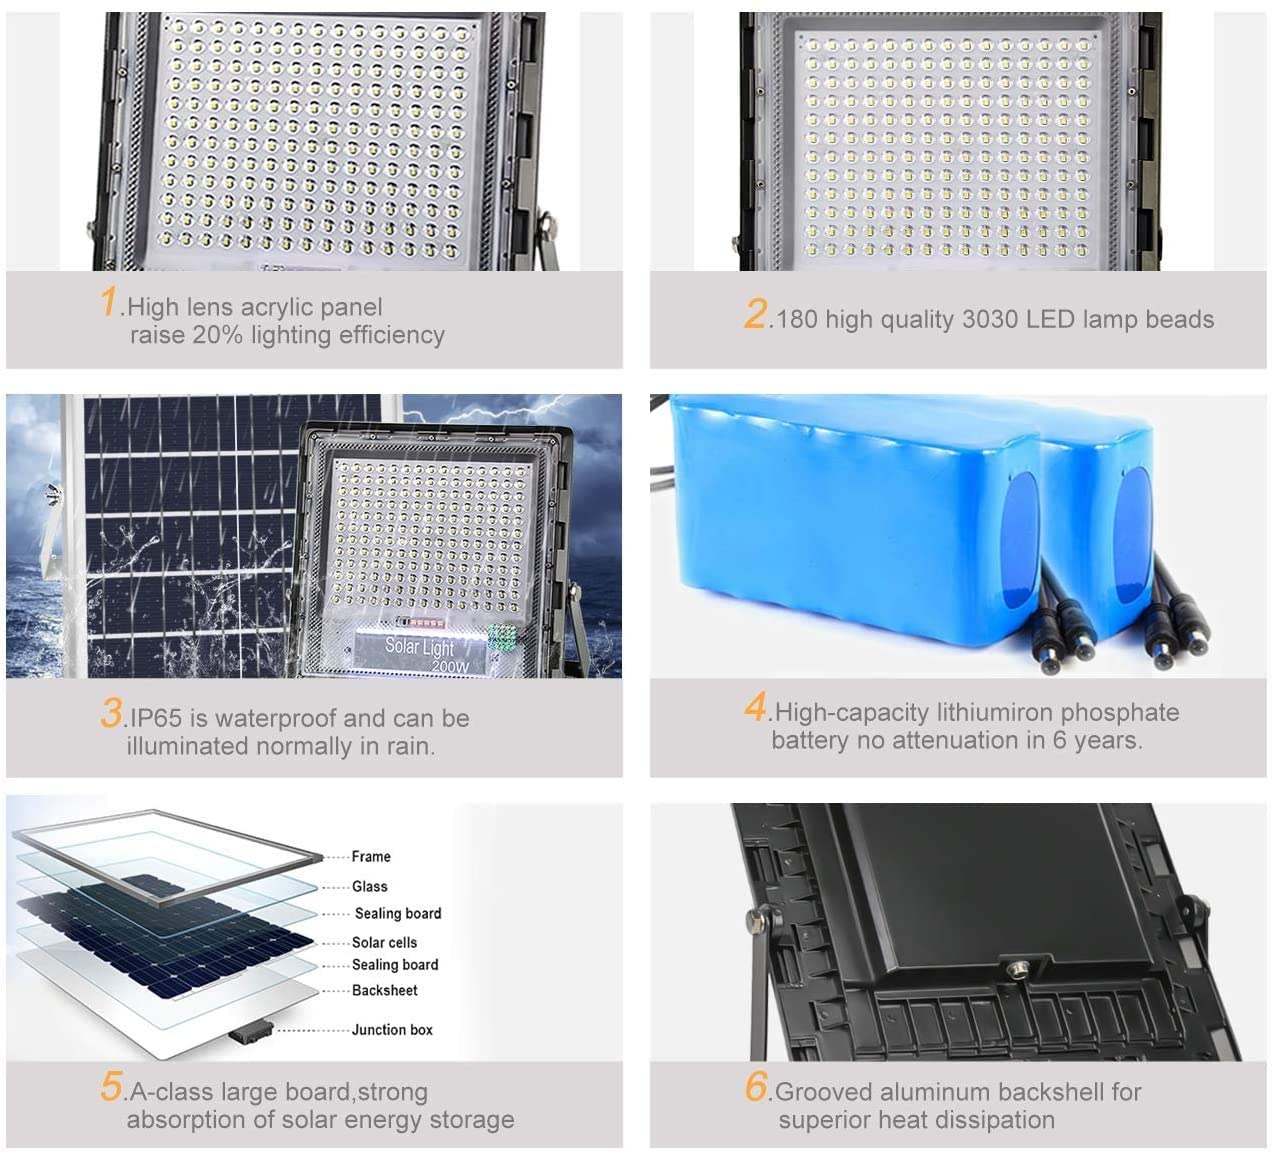 200W Solar Flood Light 180 LED Path Light with Remote Control Security Lighting.